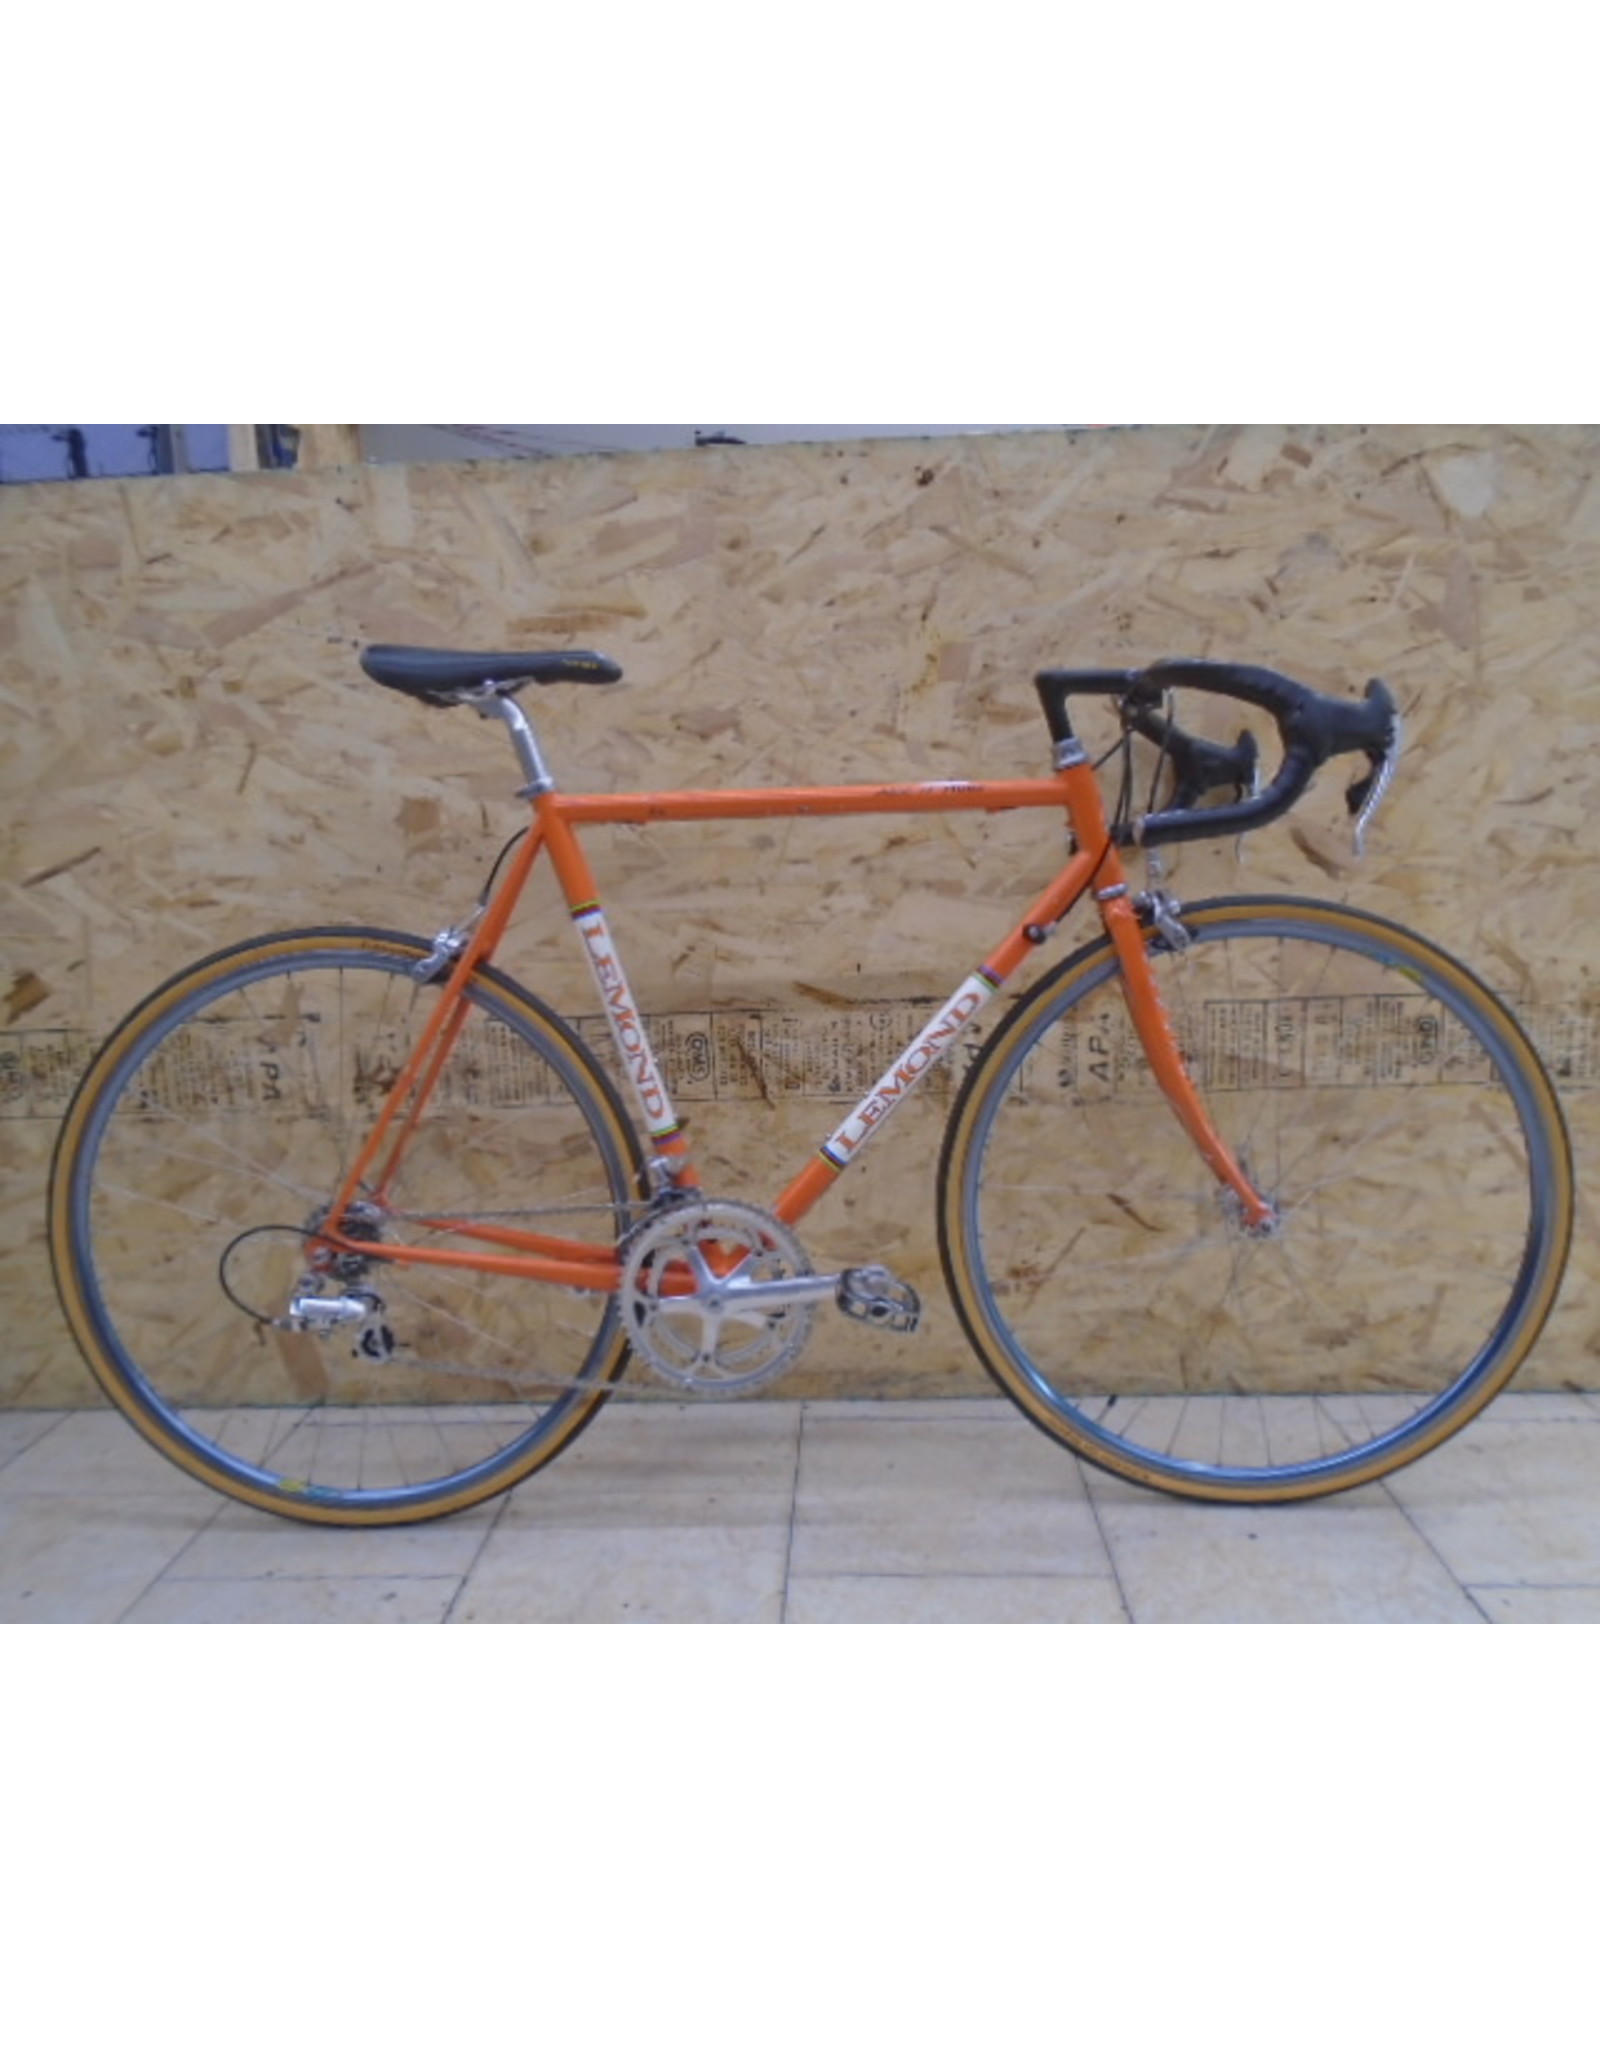 second hand road bicycles for sale